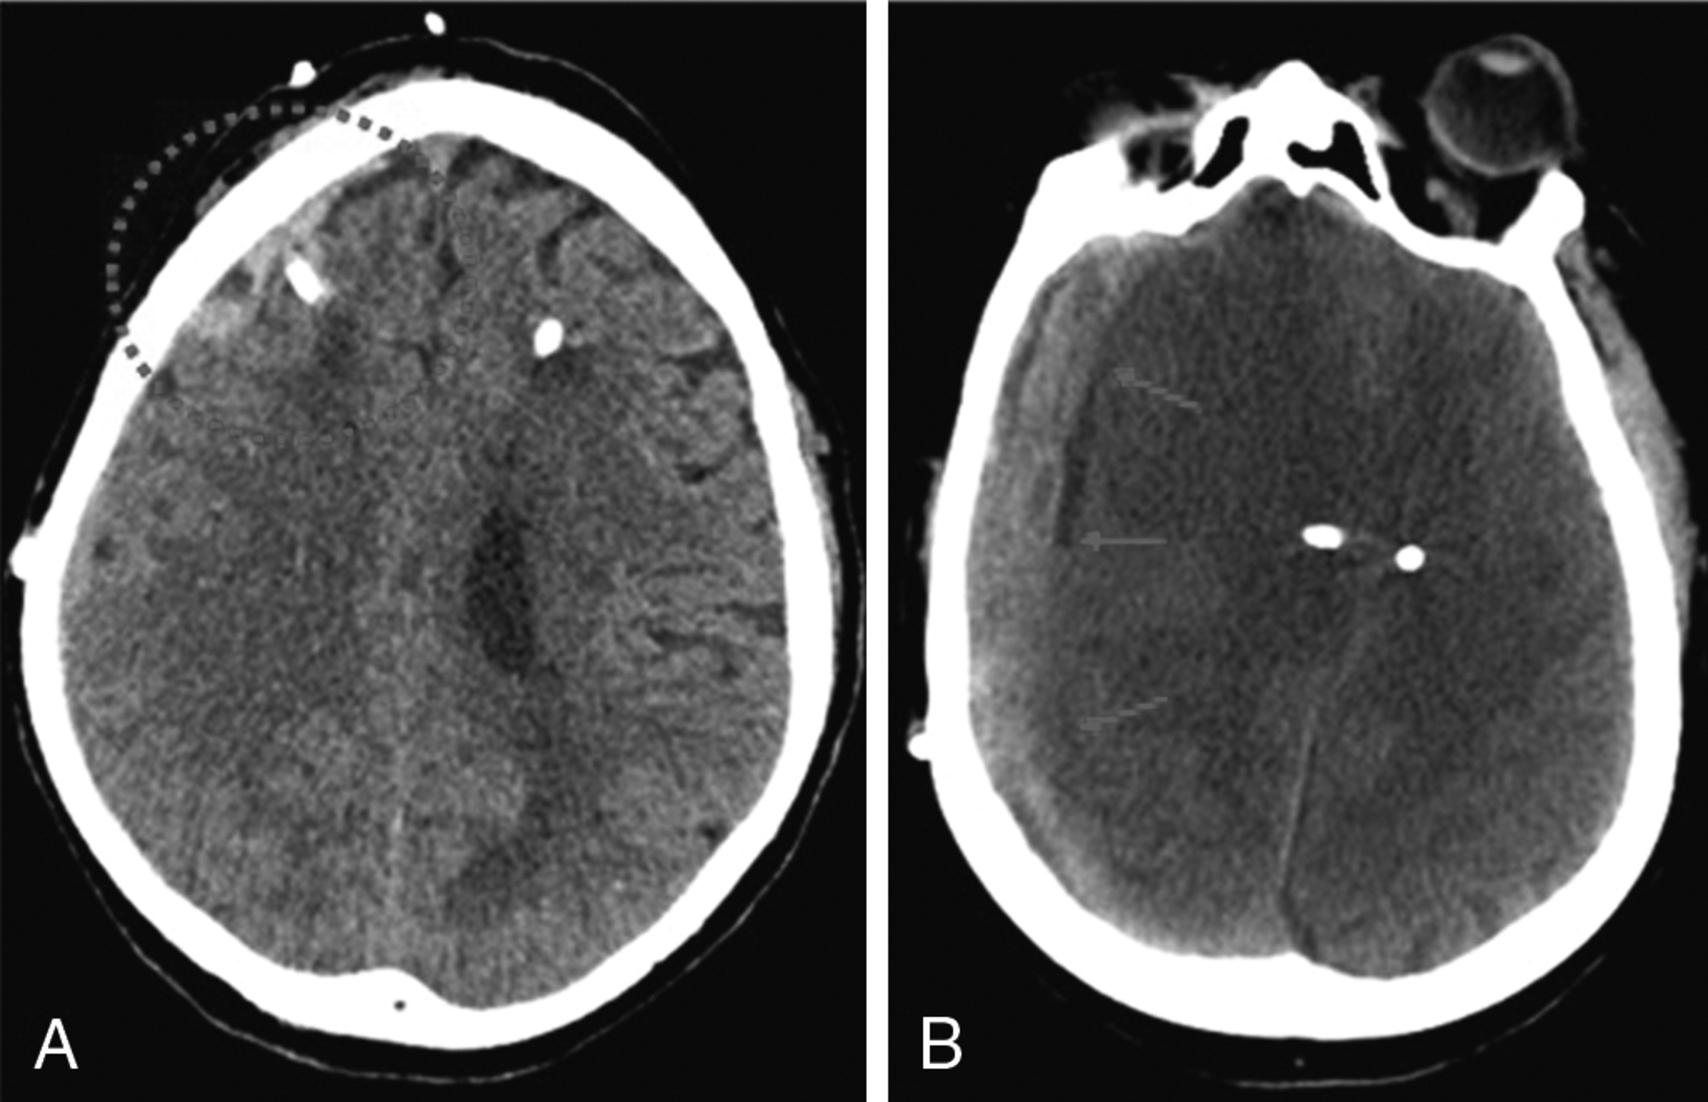 Fig. 24.7, Development of subdural hematoma (SDH) after external ventricular drain (EVD) placement in a patient taking oral anticoagulation. (A) Initial head CT after EVD placement demonstrates a small SDH. (B) Follow-up head CT at 6 hours after EVD placement with significant expansion requiring decompressive surgery.